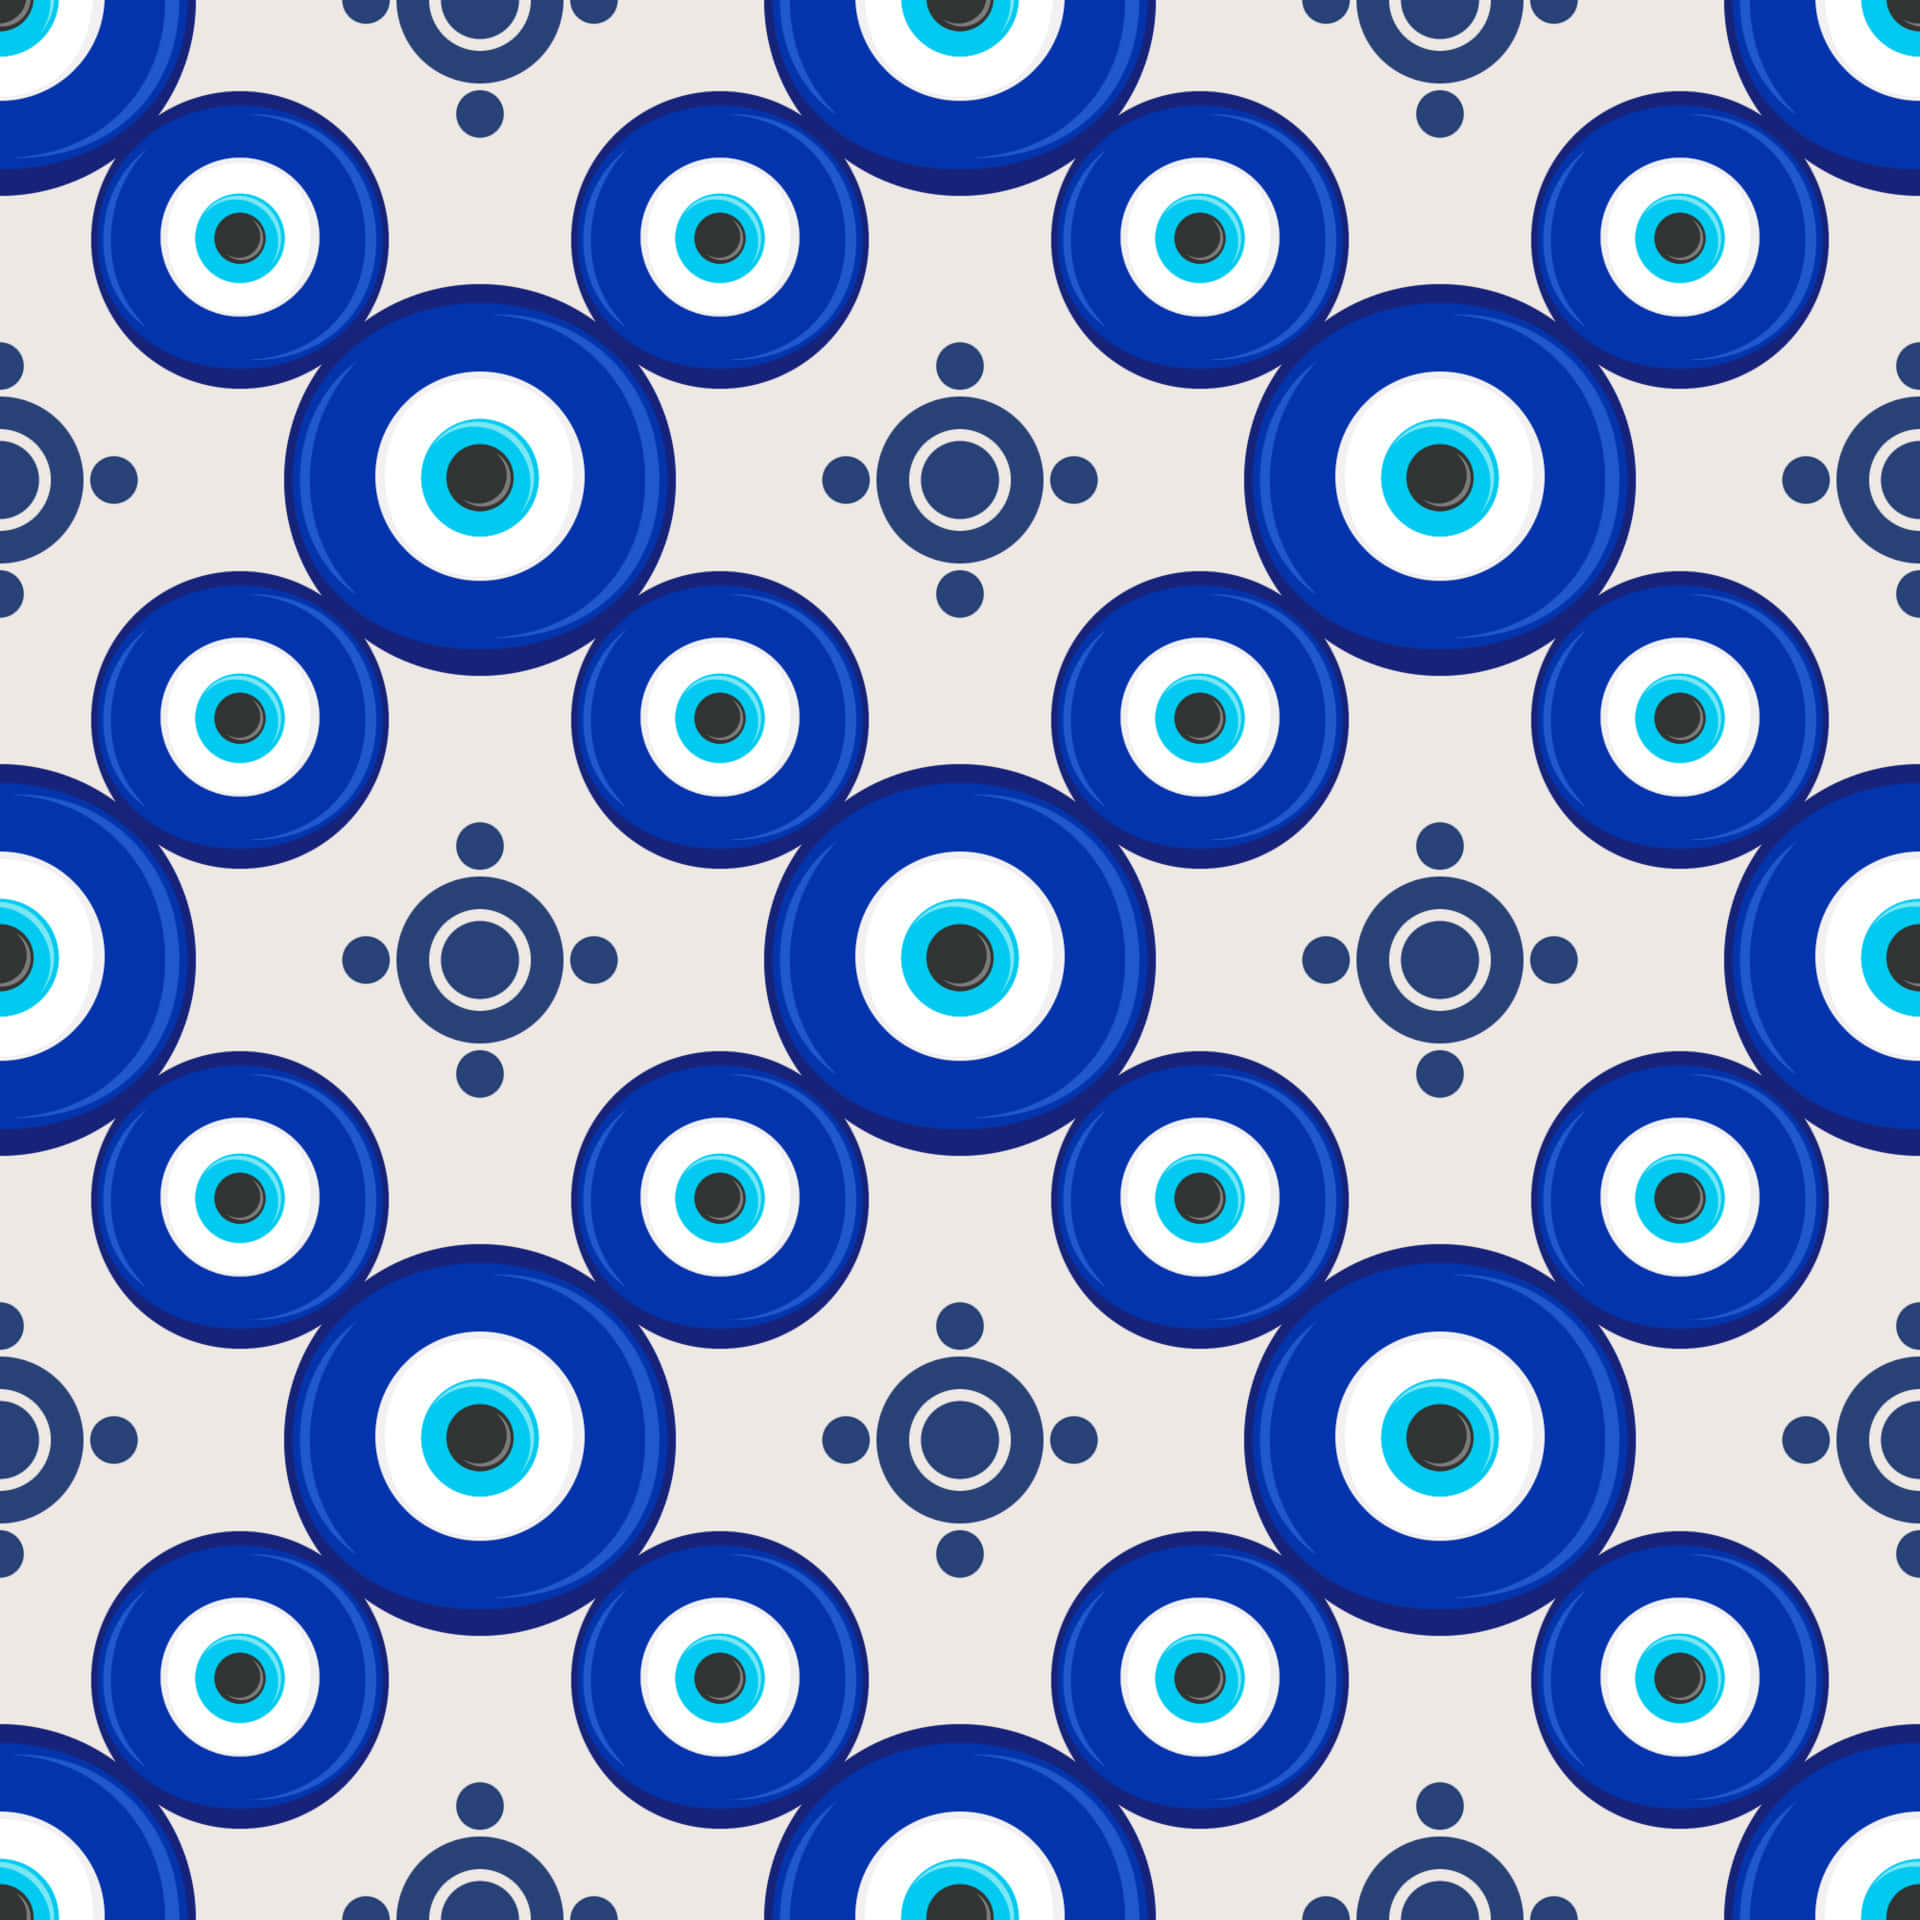 Protect yourself from the malevolent power of the "evil eye"